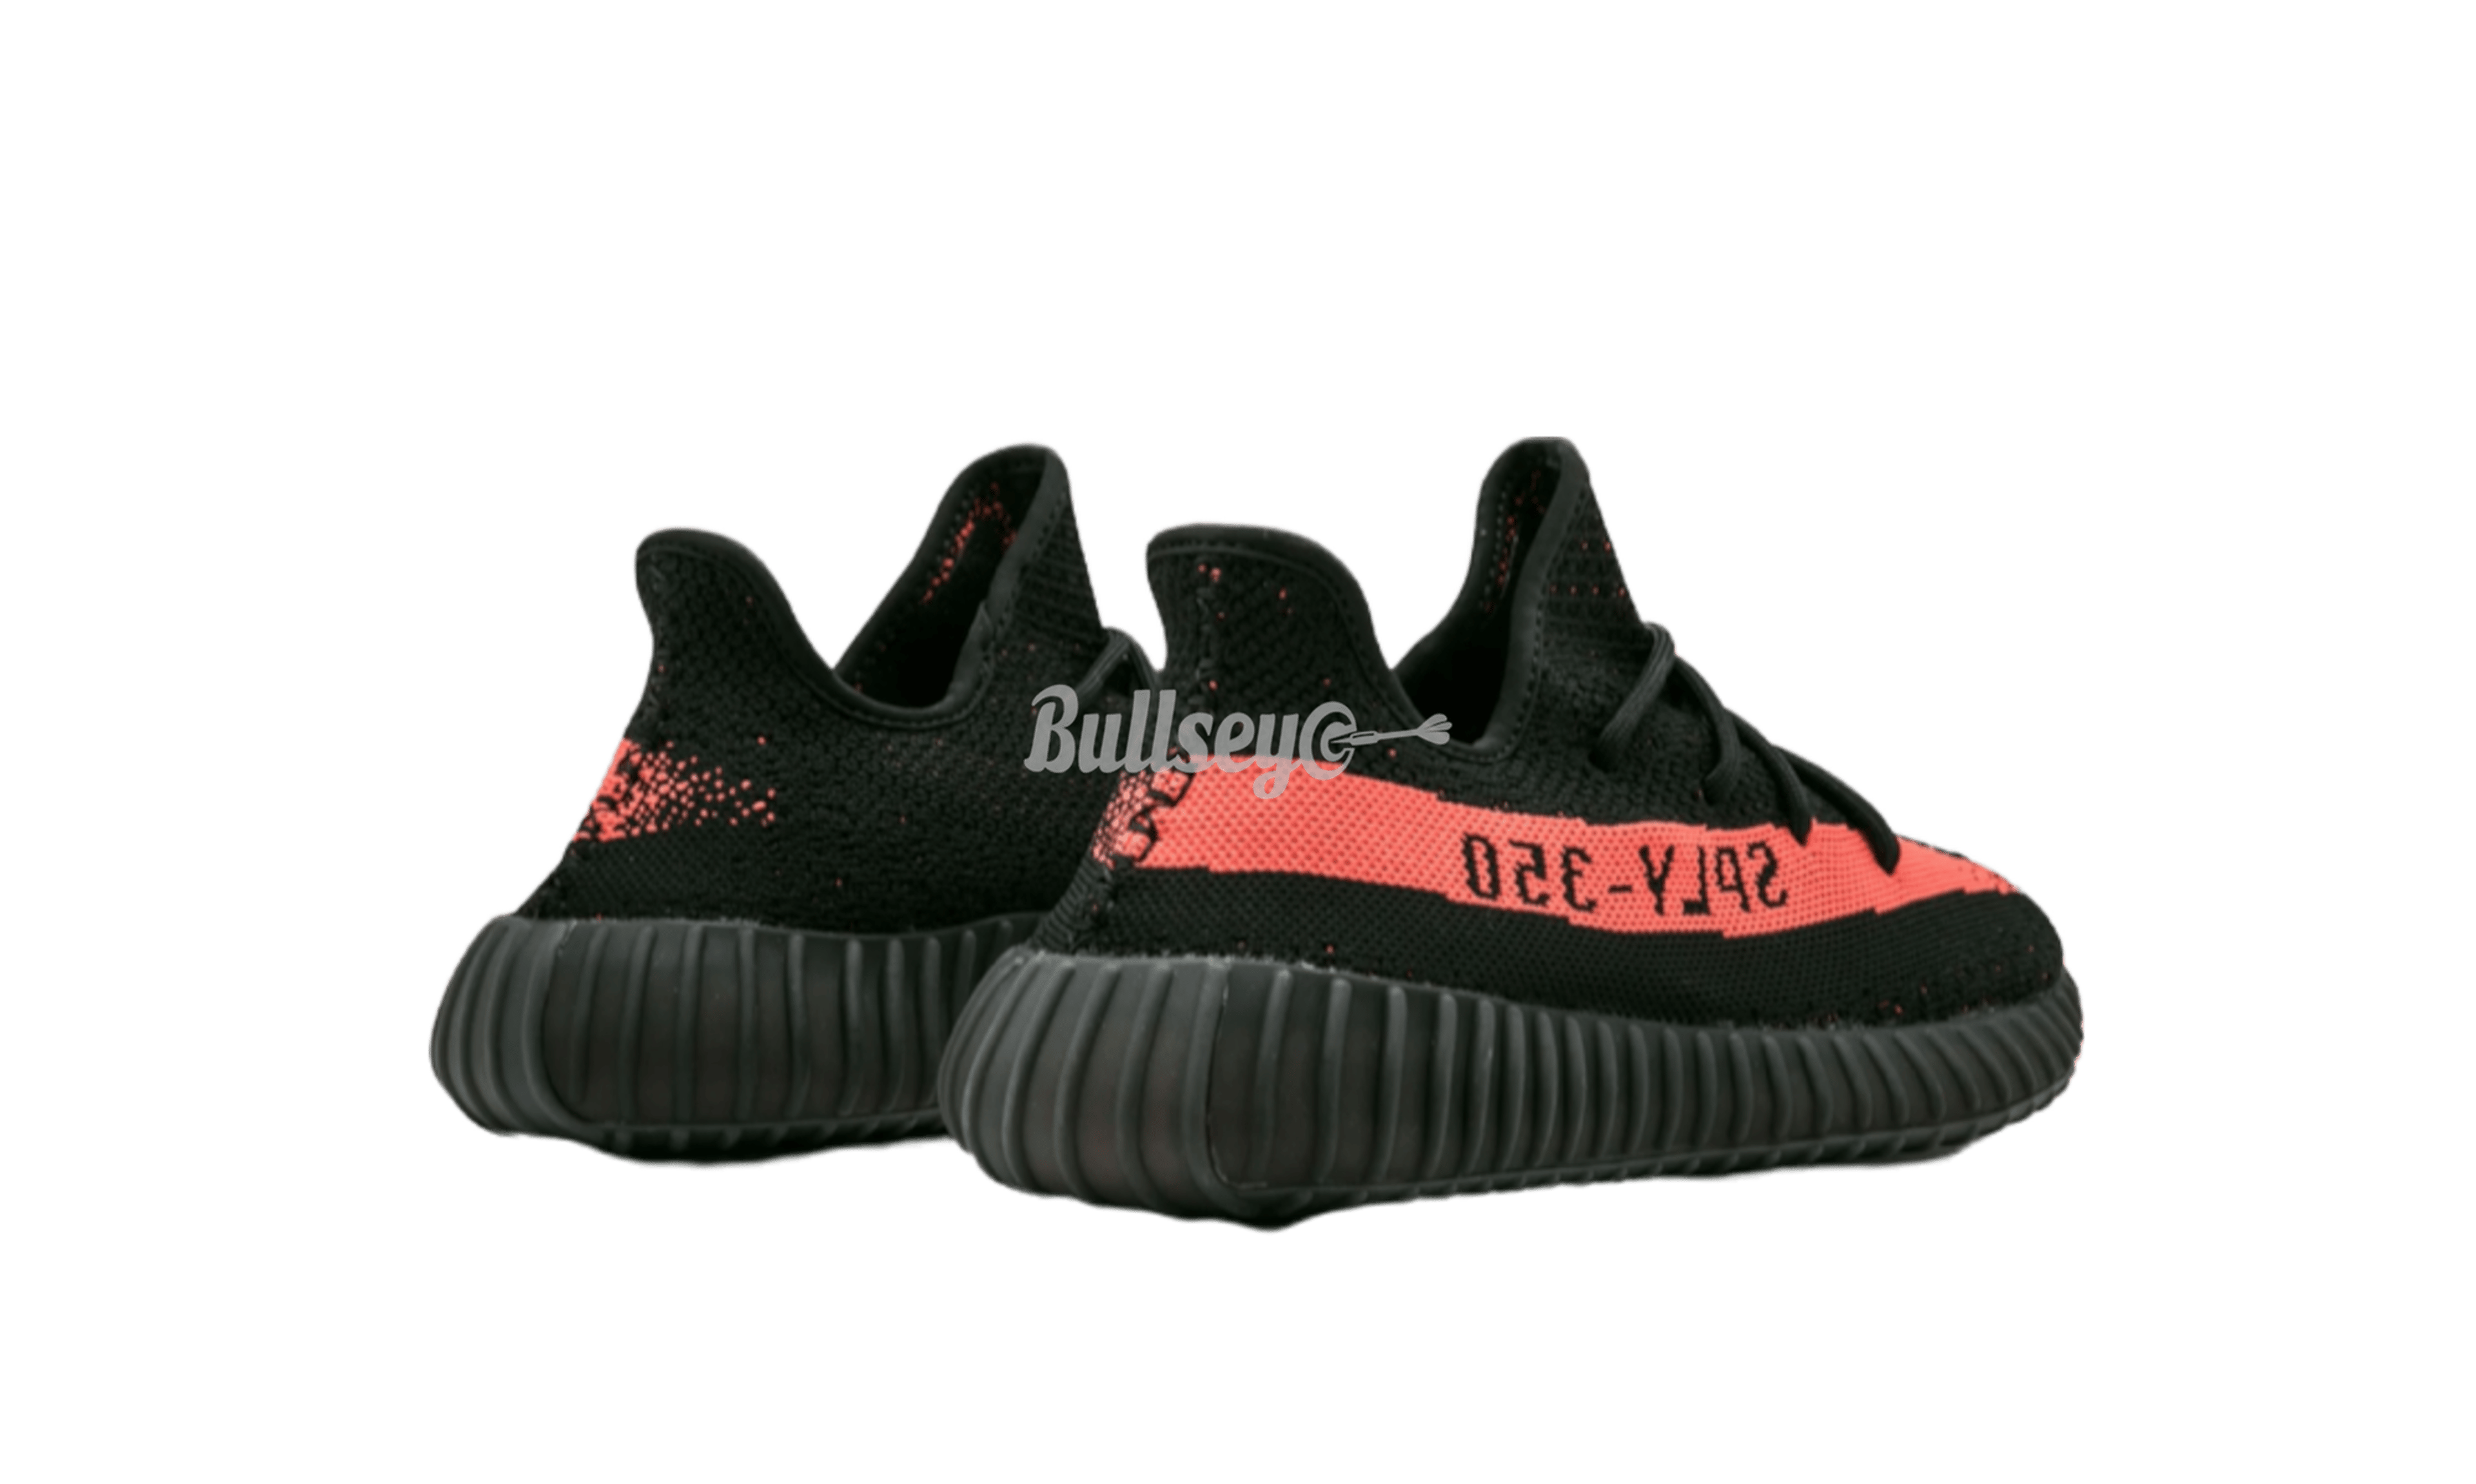 Alternate View 2 of Adidas Yeezy Boost 350 V2 "Core Black Red/Red Stripe"